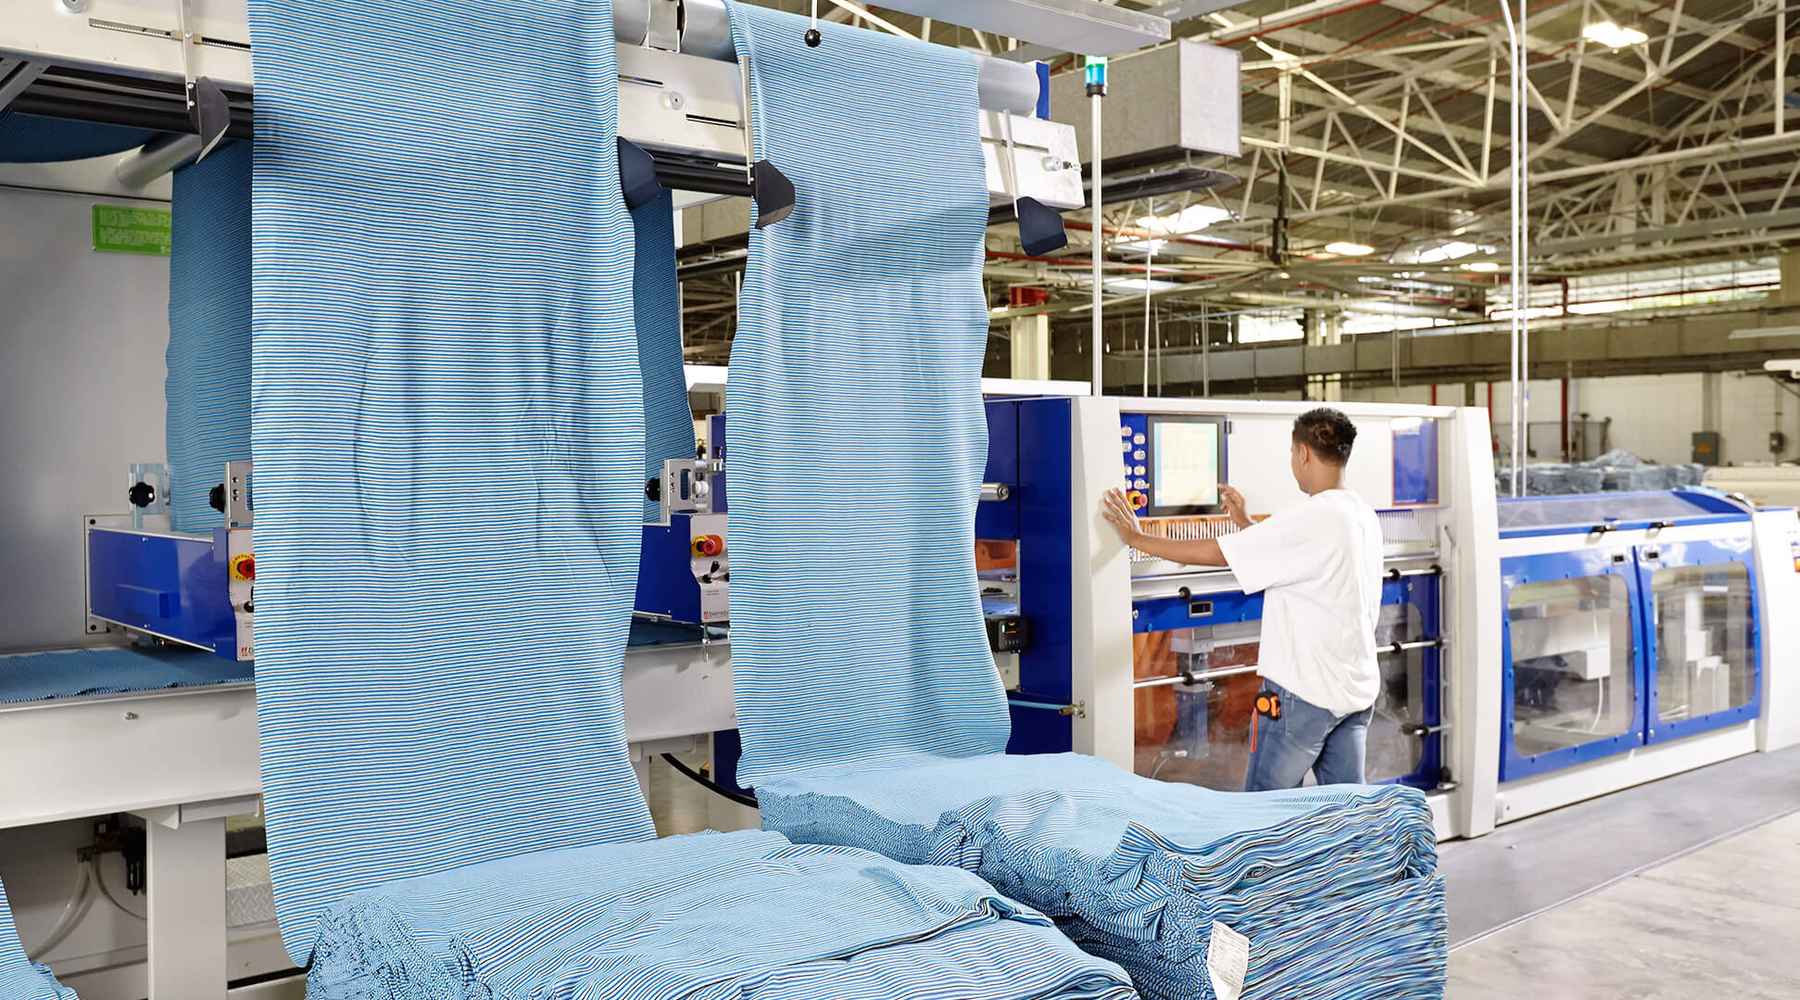 Blue striped fabric is being folded as it exists the drying chambers.